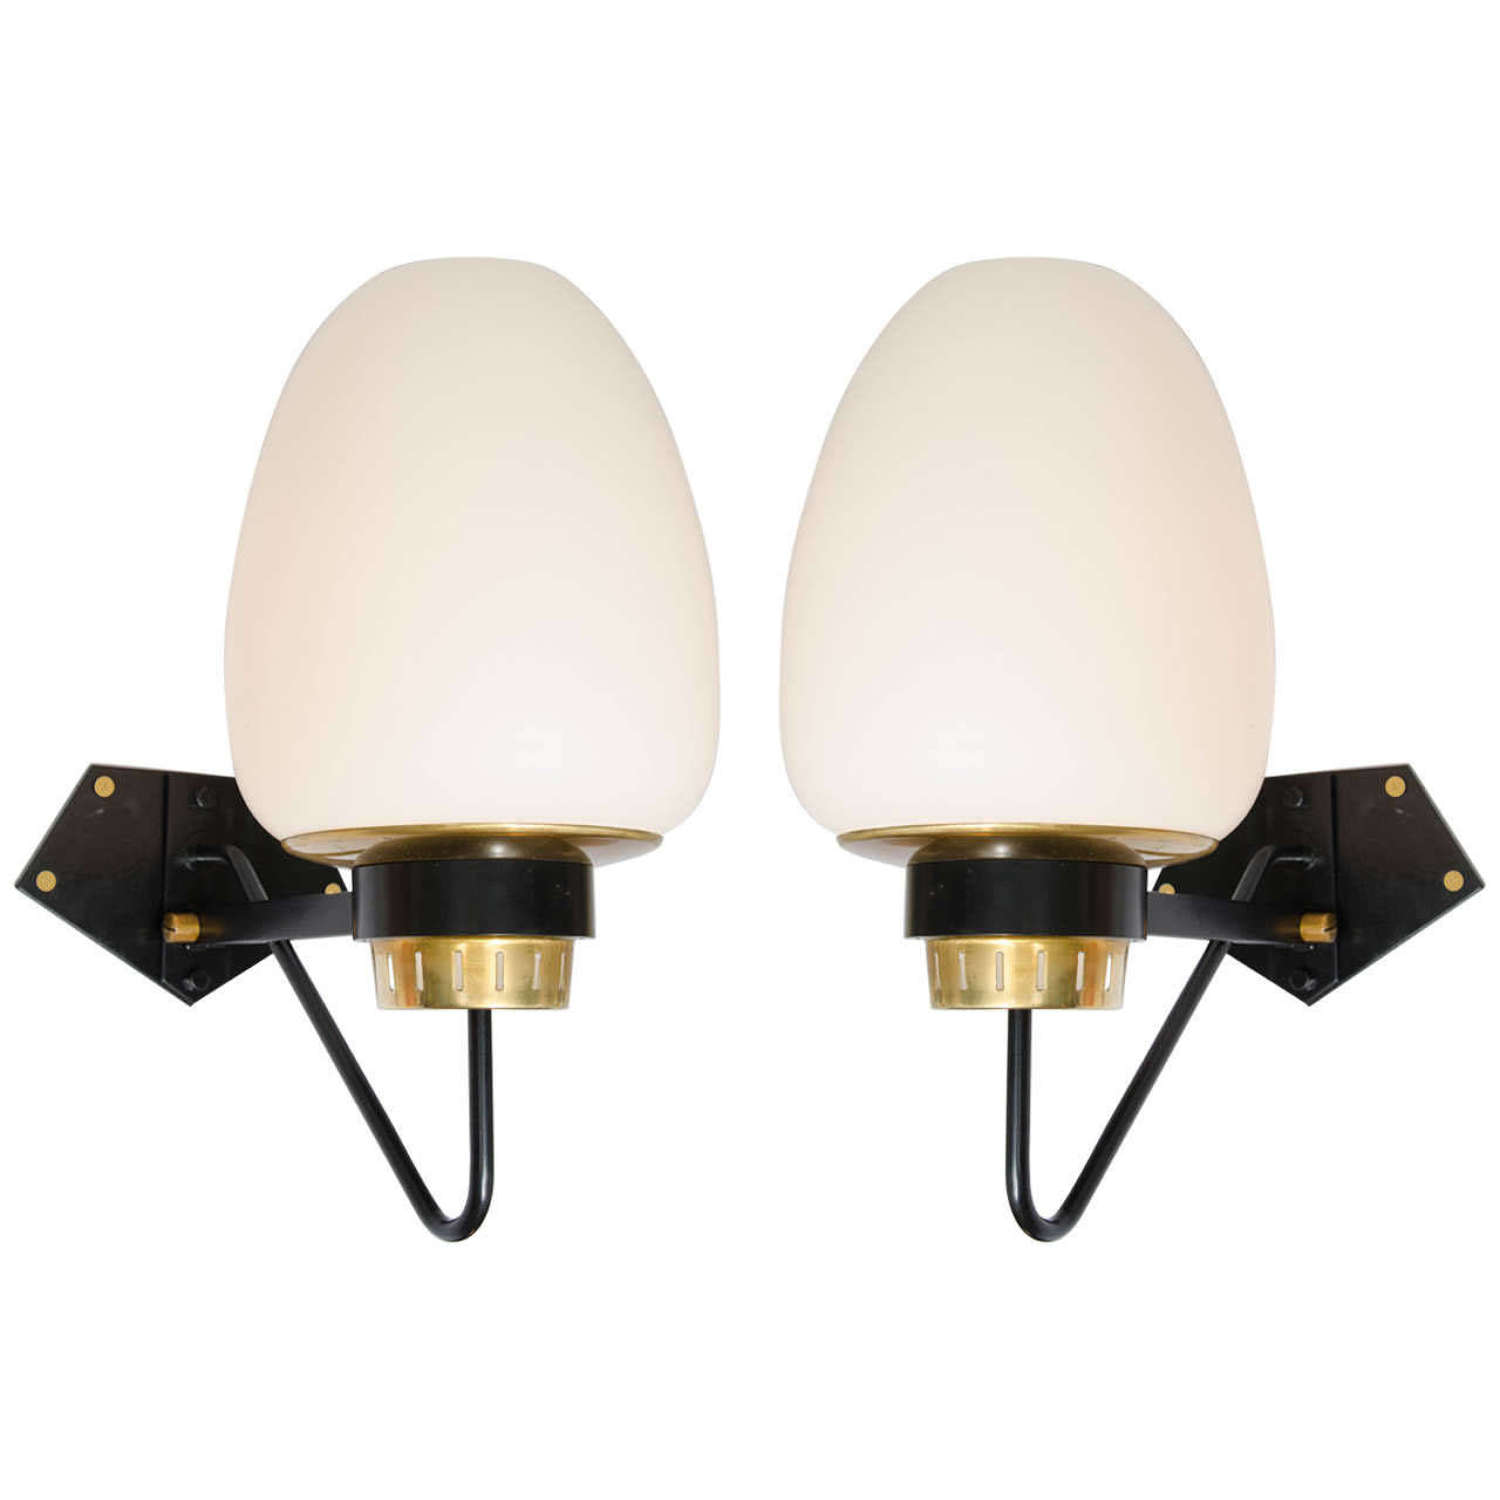 Pair of Large Opaline Wall Lamps on Black & Brass Frame